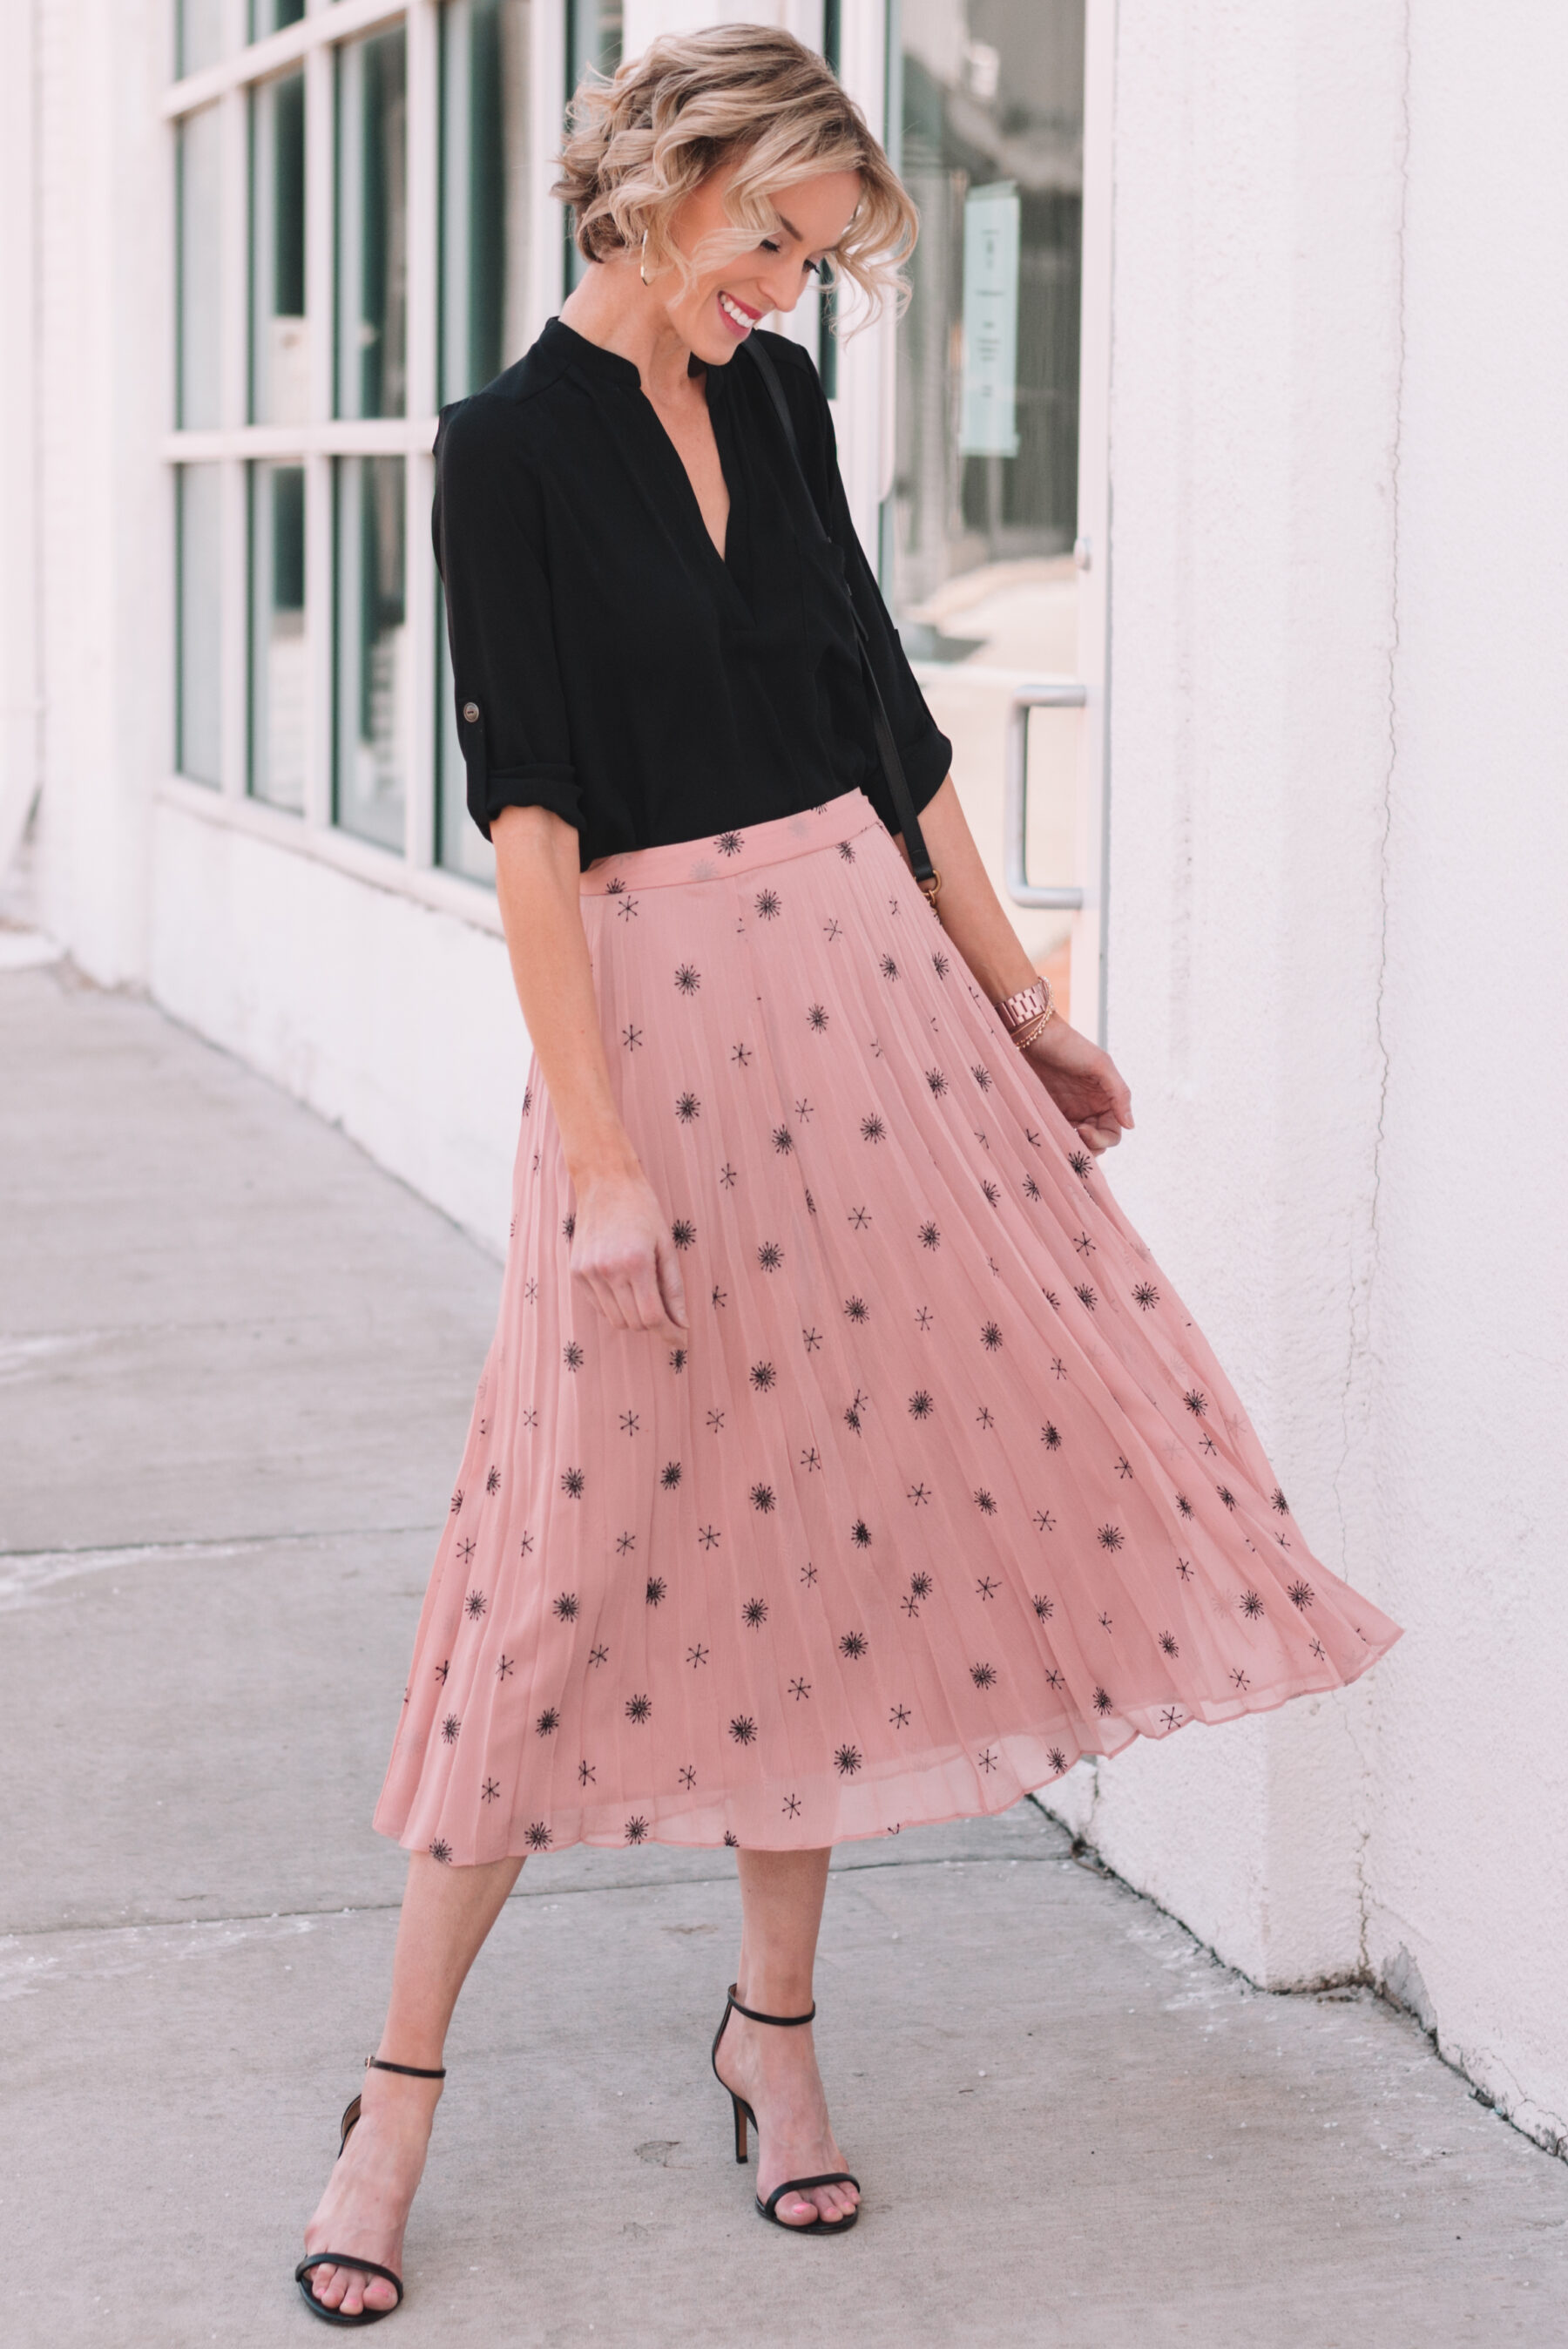 Long Skirt Outfits: How To Style Maxis & Midis This Season - Lulus